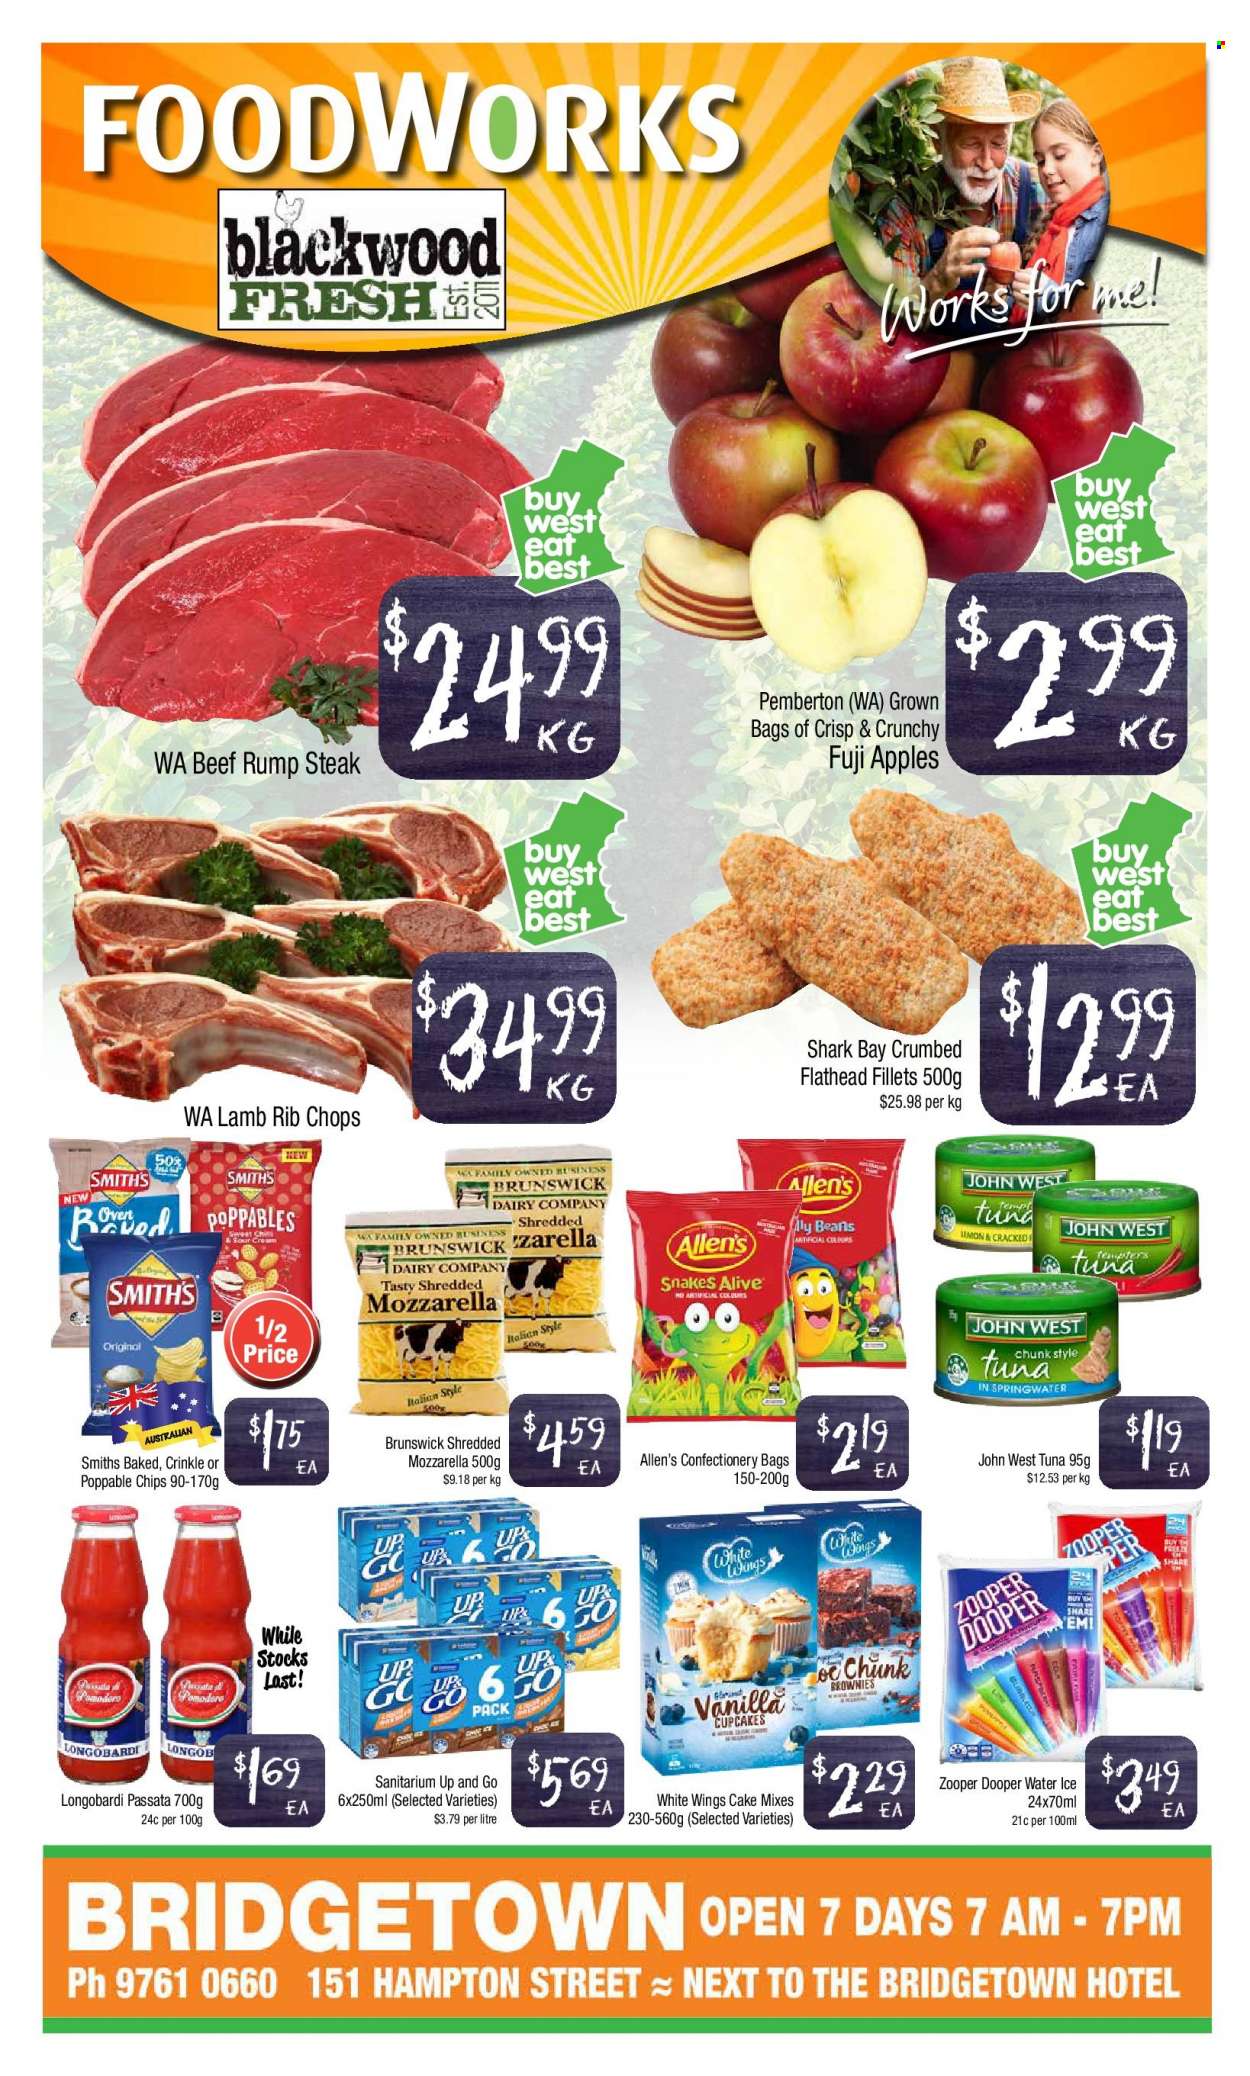 thumbnail - Foodworks Catalogue - 20 Oct 2021 - 26 Oct 2021 - Sales products - cake, cupcake, White Wings, beans, Fuji apple, apples, tuna, mozzarella, Zooper Dooper, chips, beef meat, steak, rump steak, rib chops. Page 1.